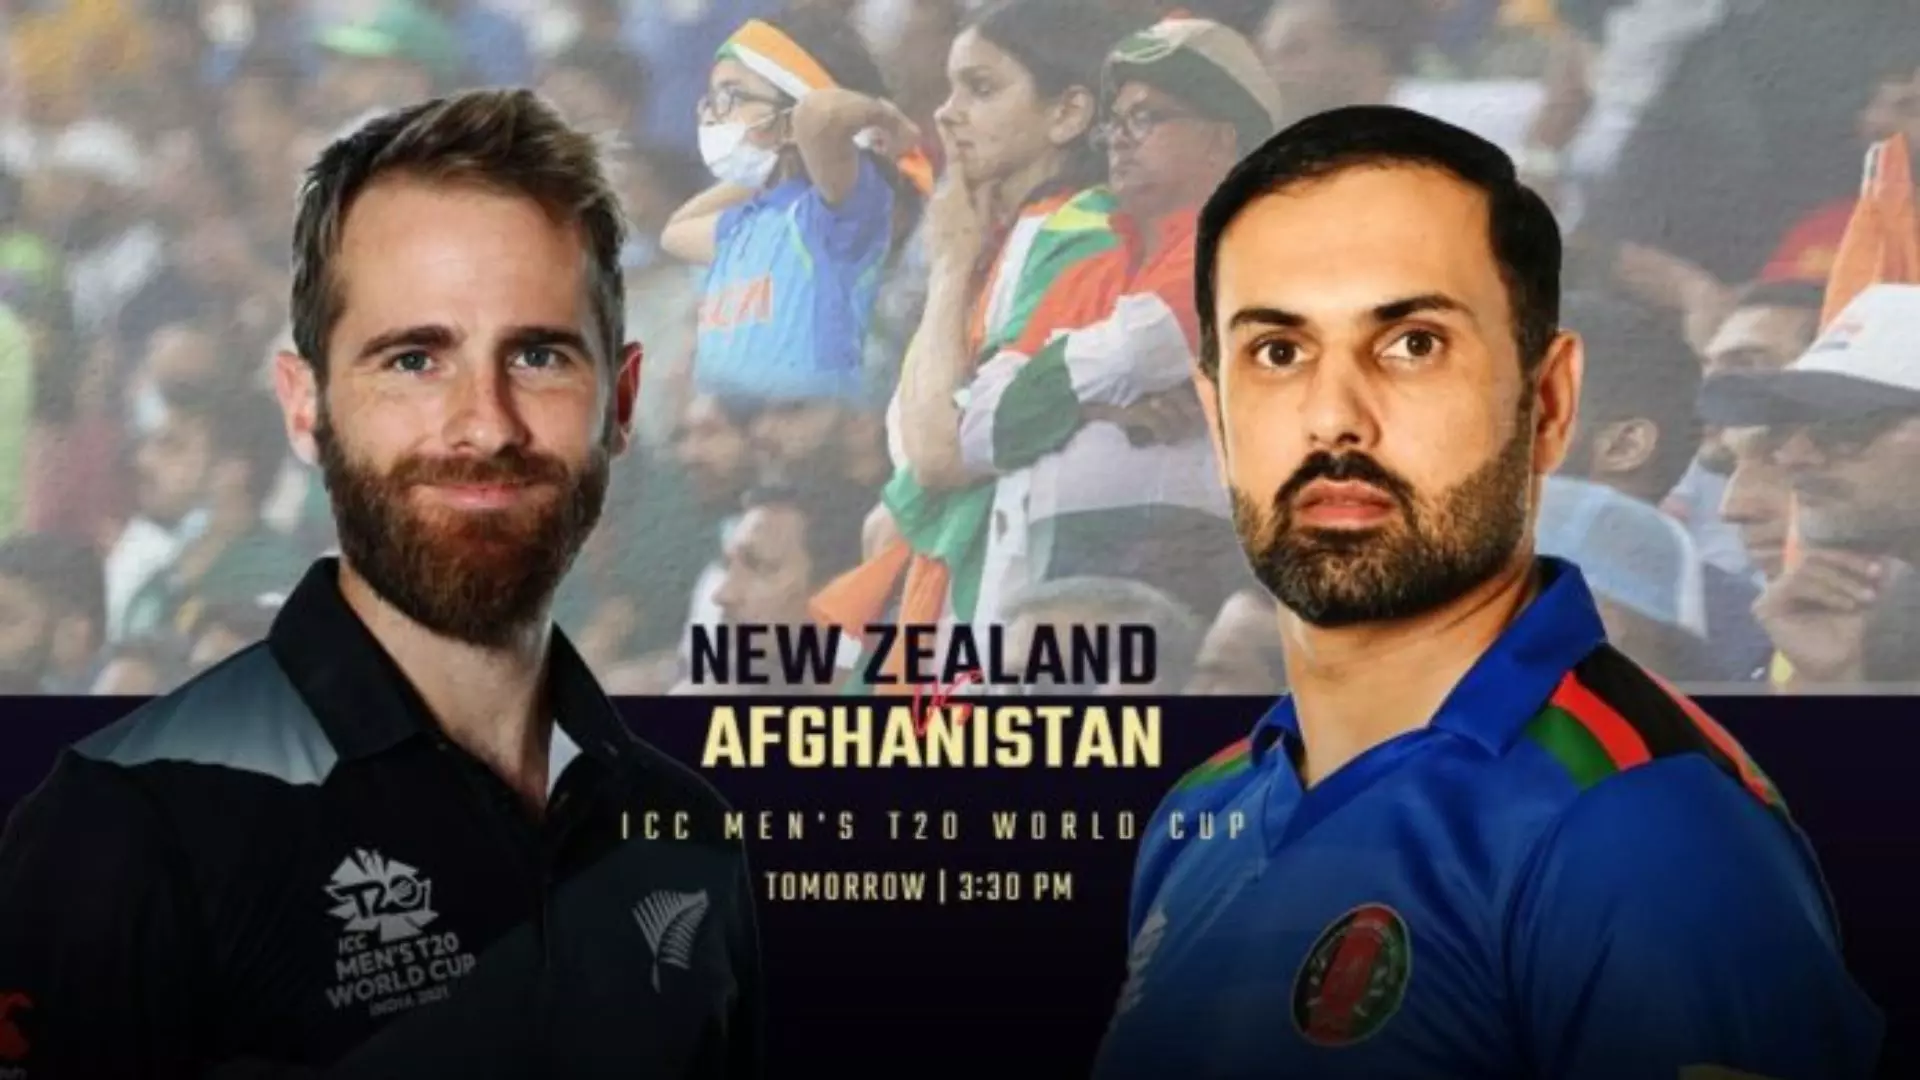 T20 World Cup 2021 New Zealand Vs Afghanistan Match Preview Today 07th November 2021 - Cricket News